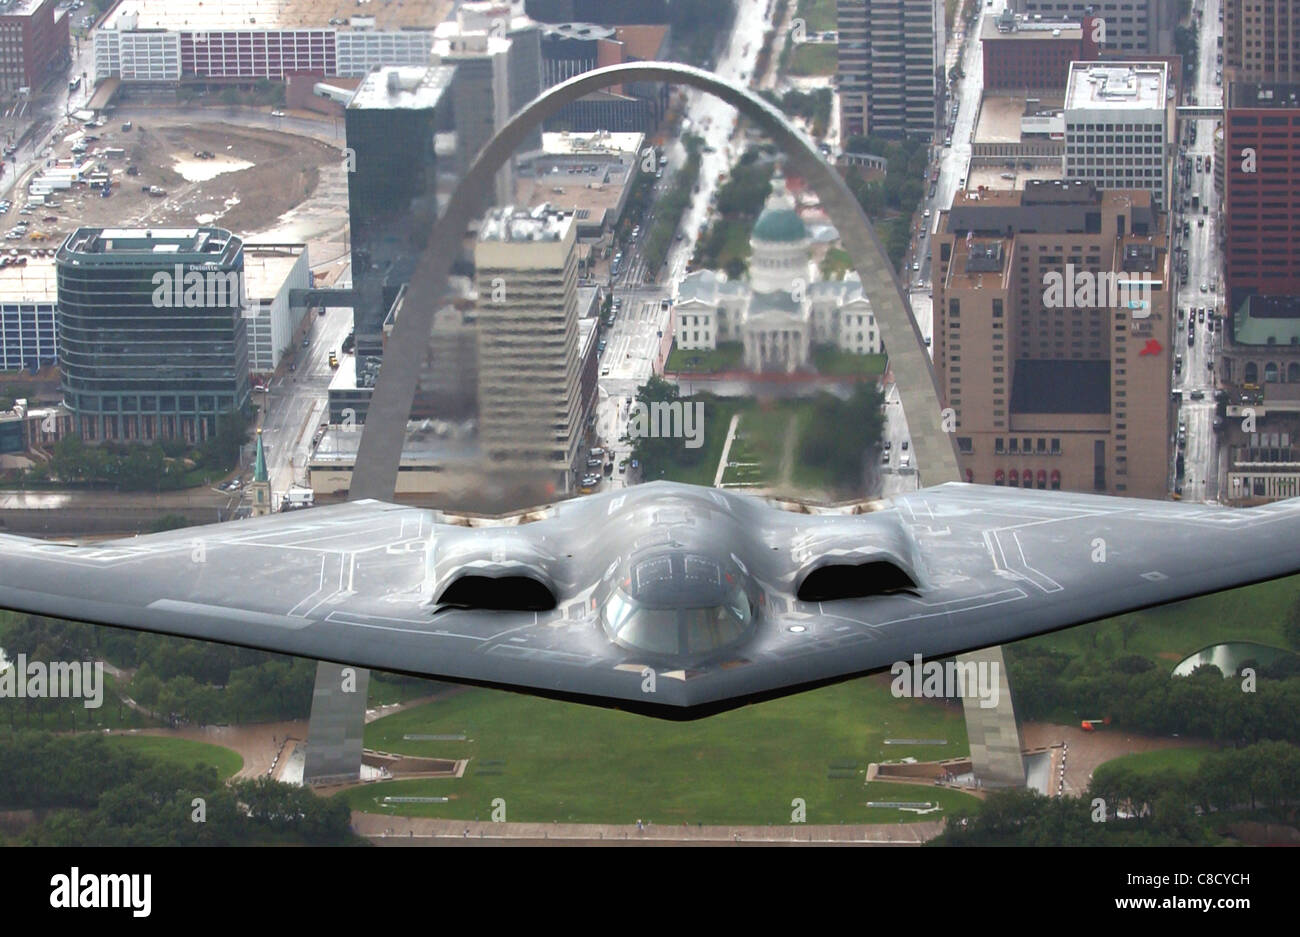 B 2 Spirit Stealth Bomber flying over the St. Louis Arch Stock Photo